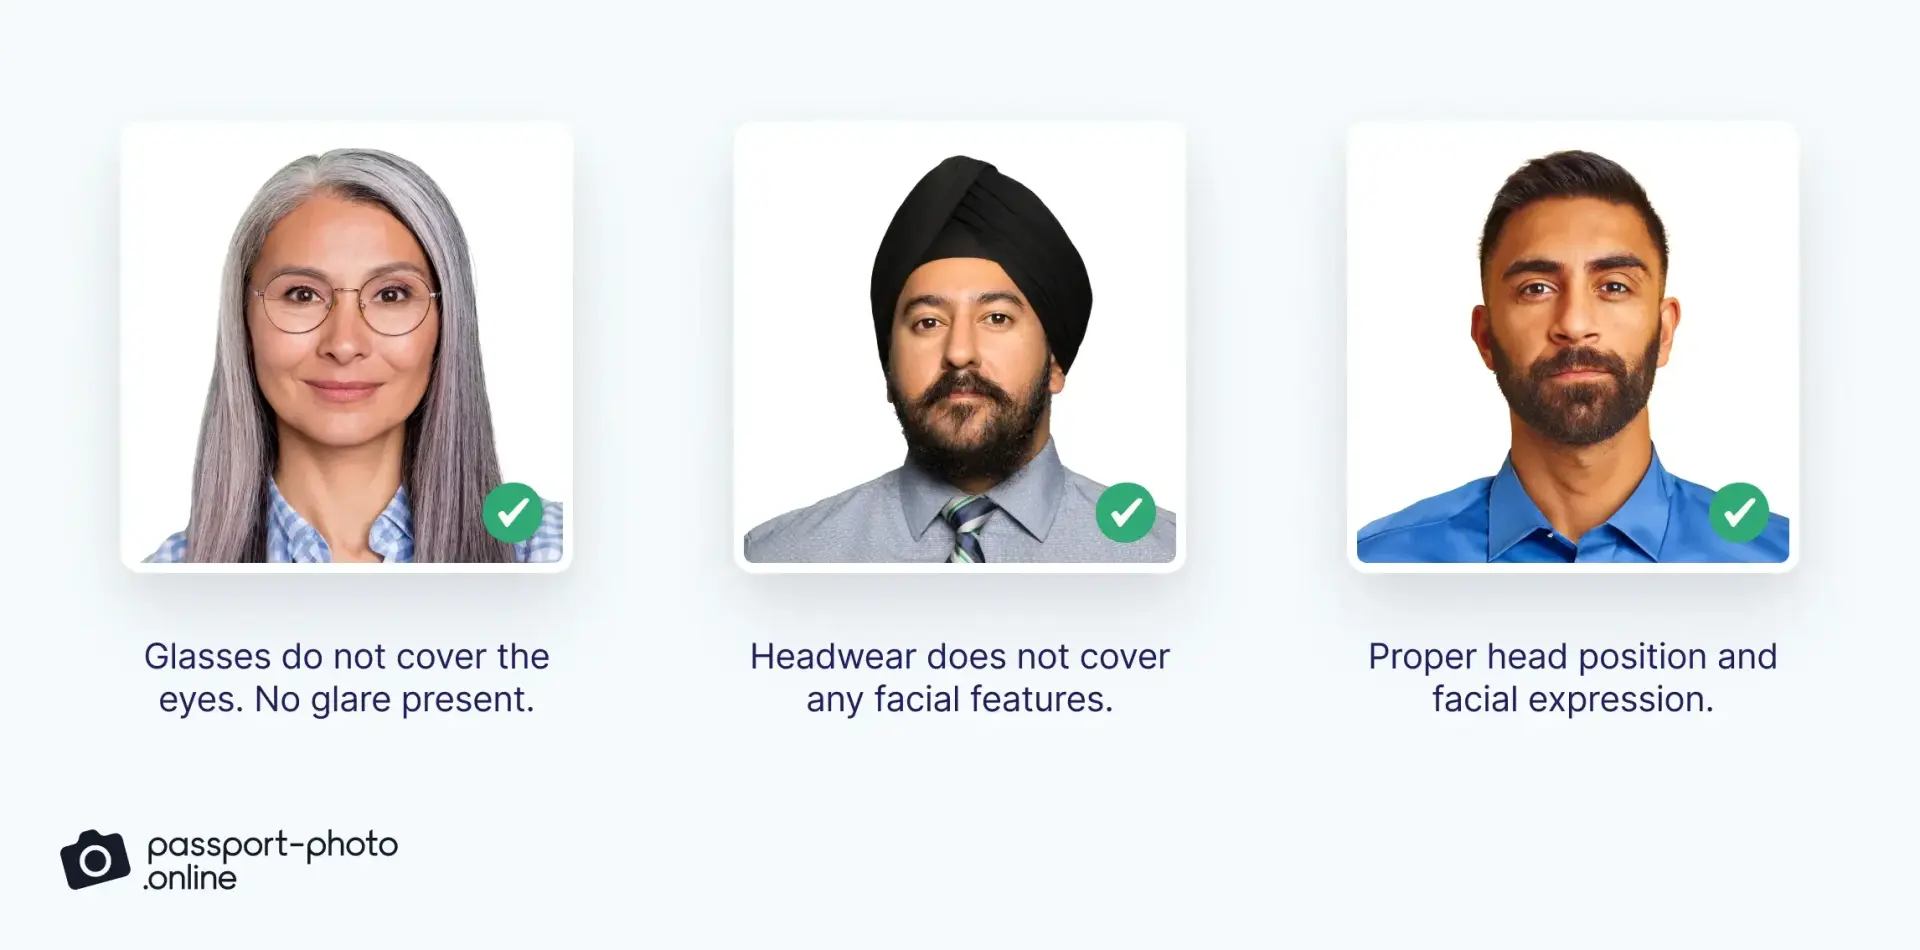 Picture examples of compliant Indian visa photos.